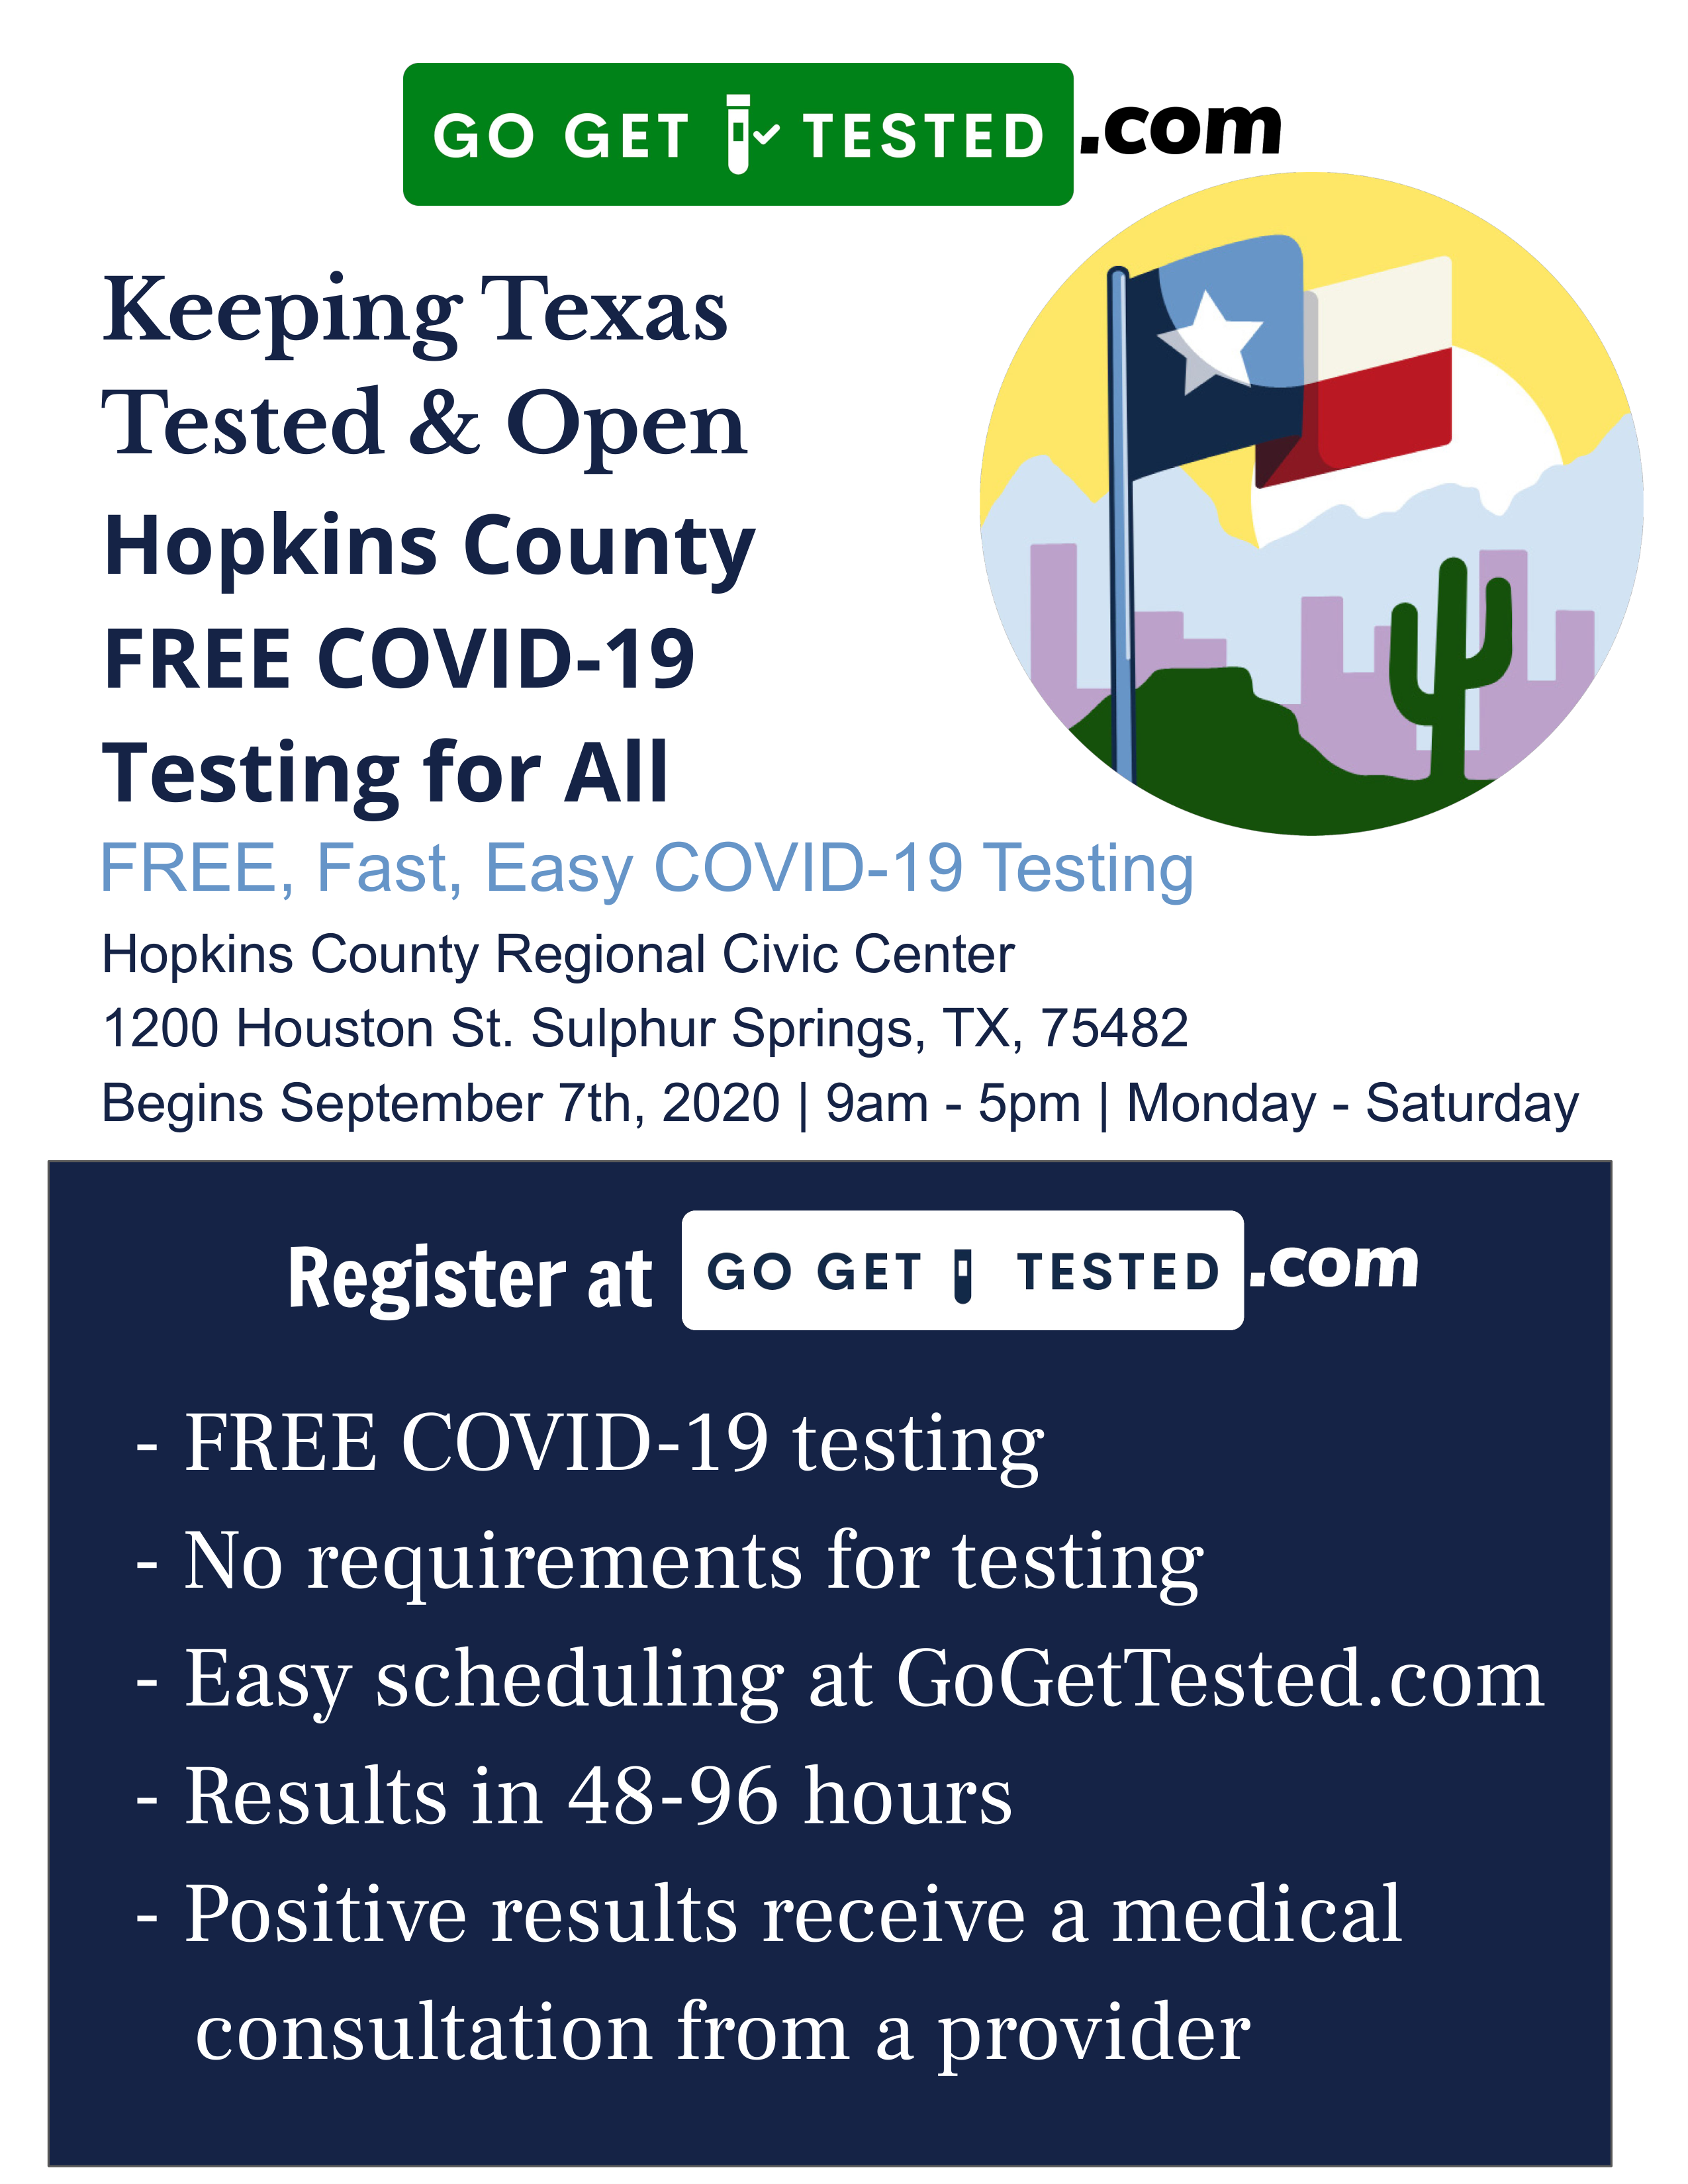 Free COVID-19 Testing Continues at Hopkins County Civic Center